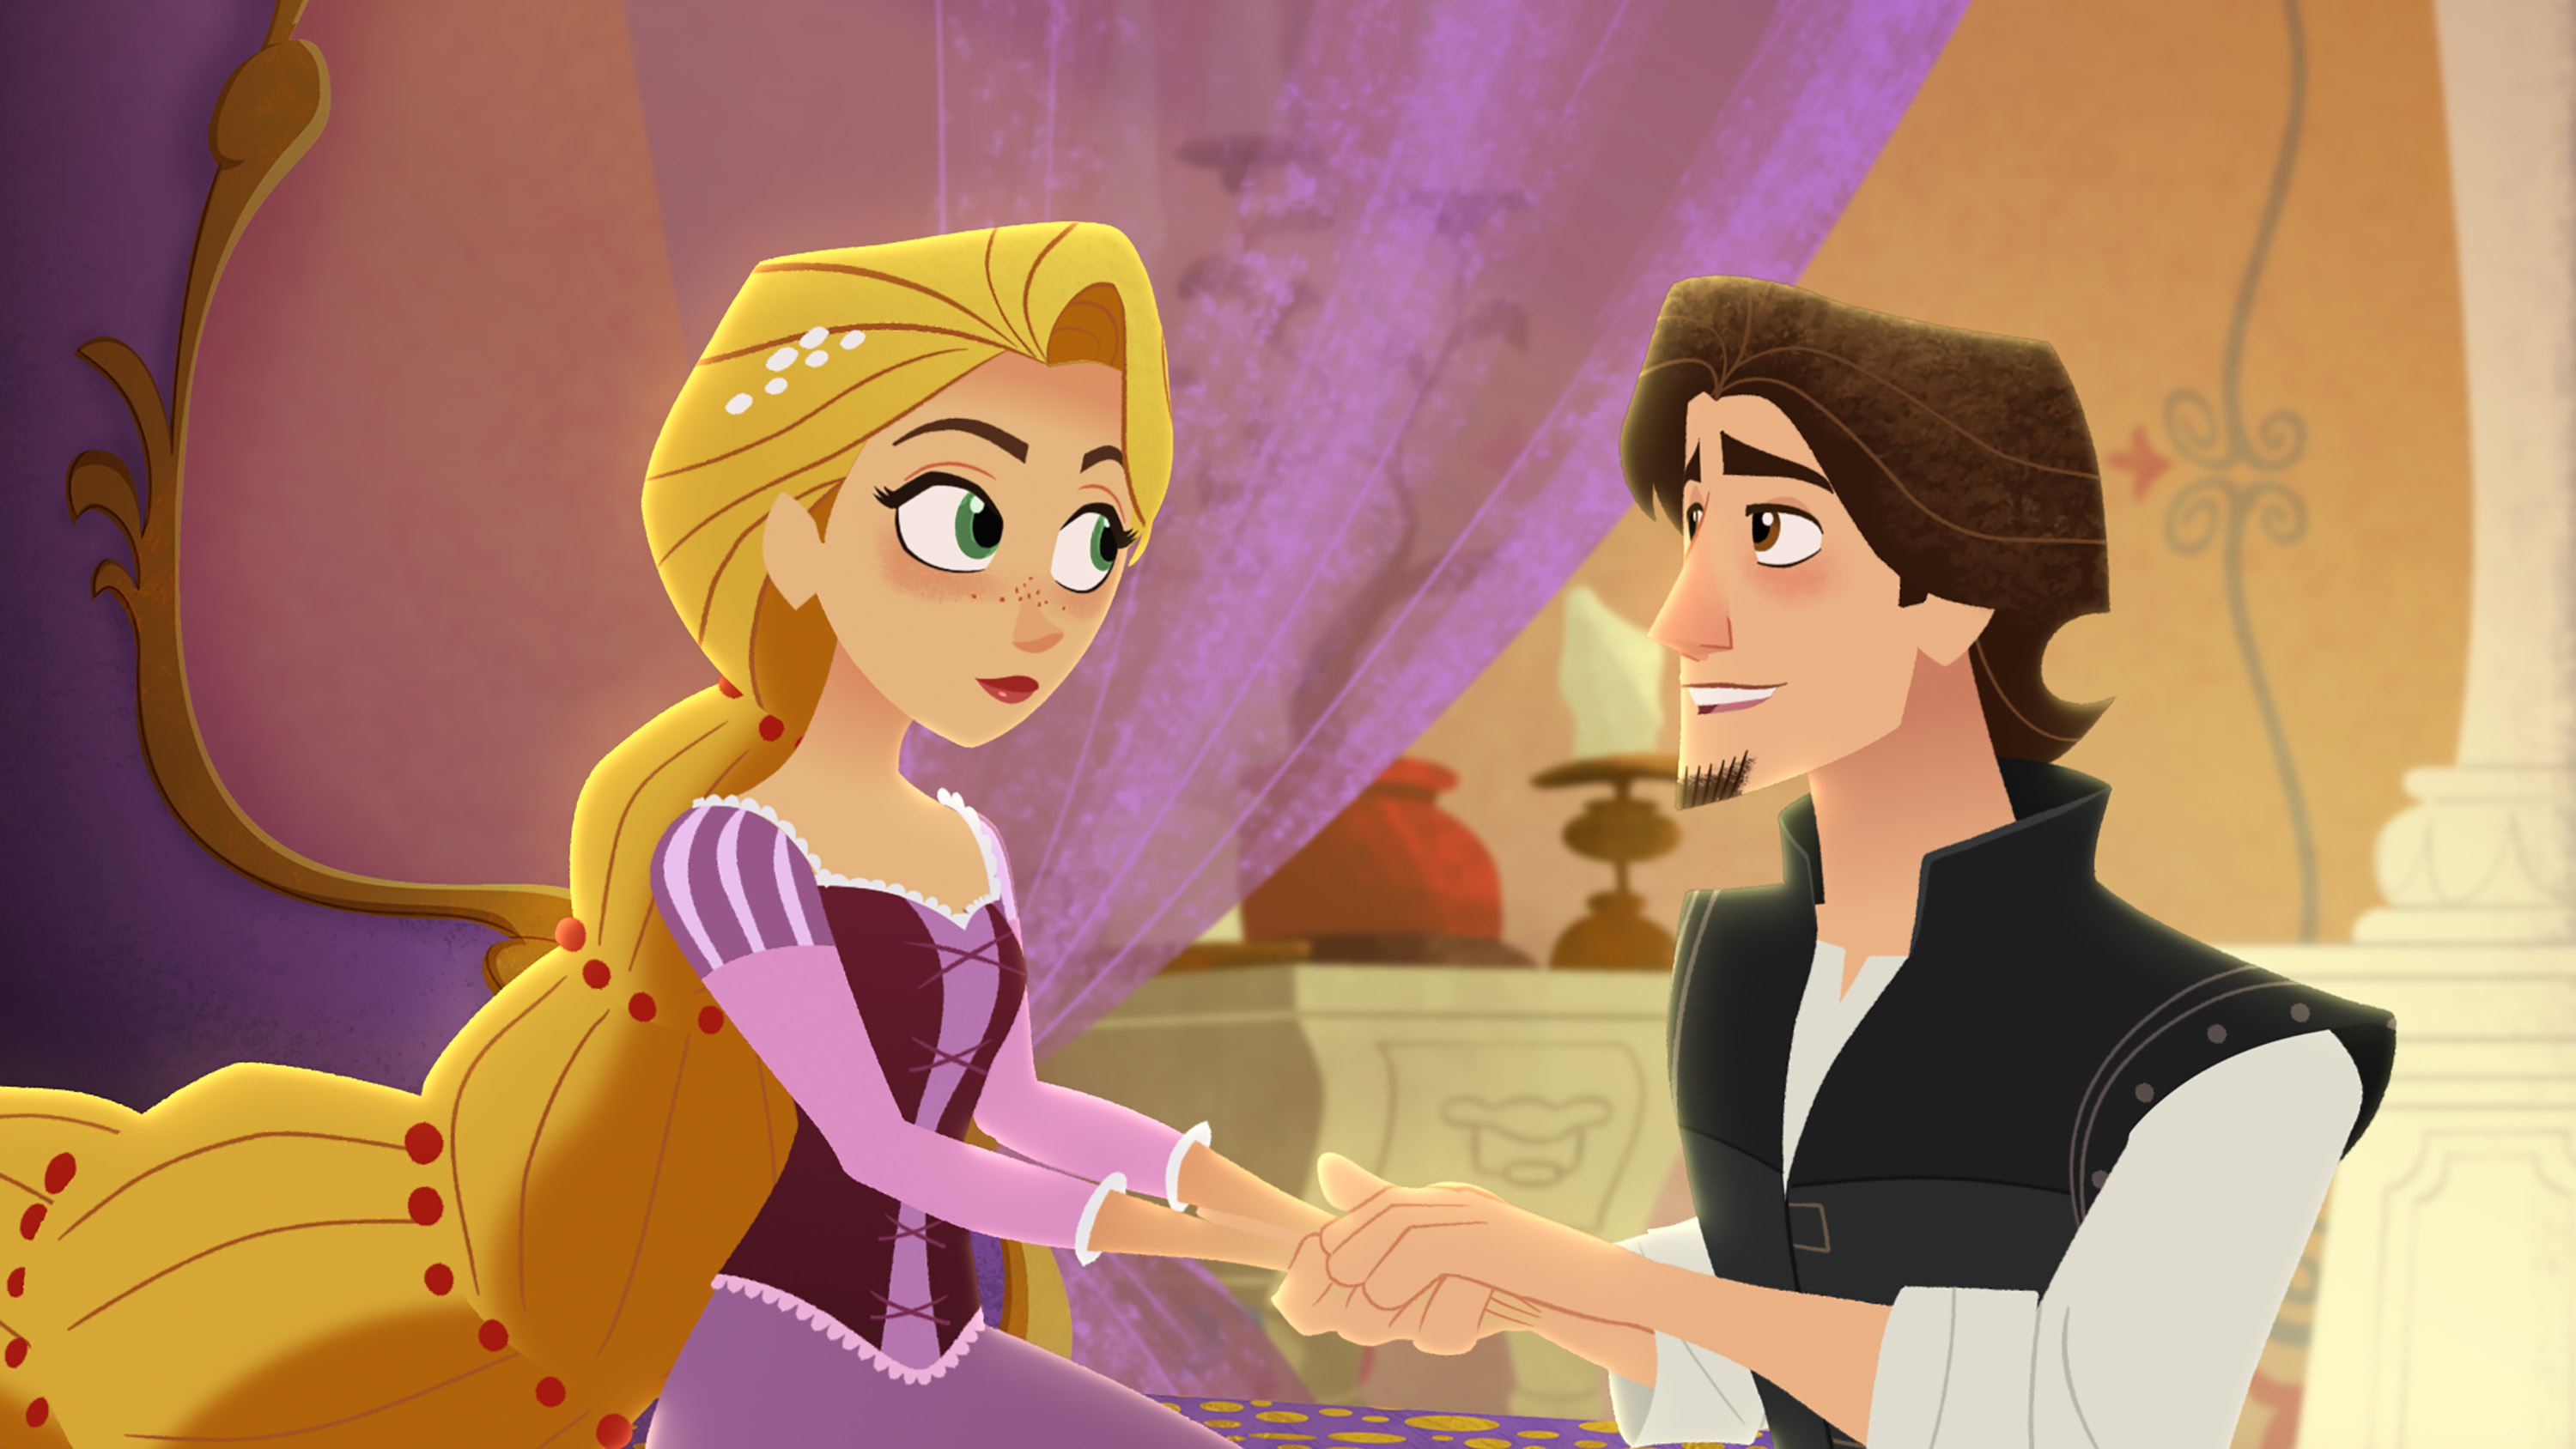 TANGLED: THE SERIES - "What the Hair?!" - Rapunzel and Cassandra venture out to a wizard's cottage to try and find out what has happened to her hair. This episode of "Tangled: The Series" airs Friday, March 24 (7:30 - 8:00 P.M. EDT) on Disney Channel. (Disney Channel) RAPUNZEL, EUGENE